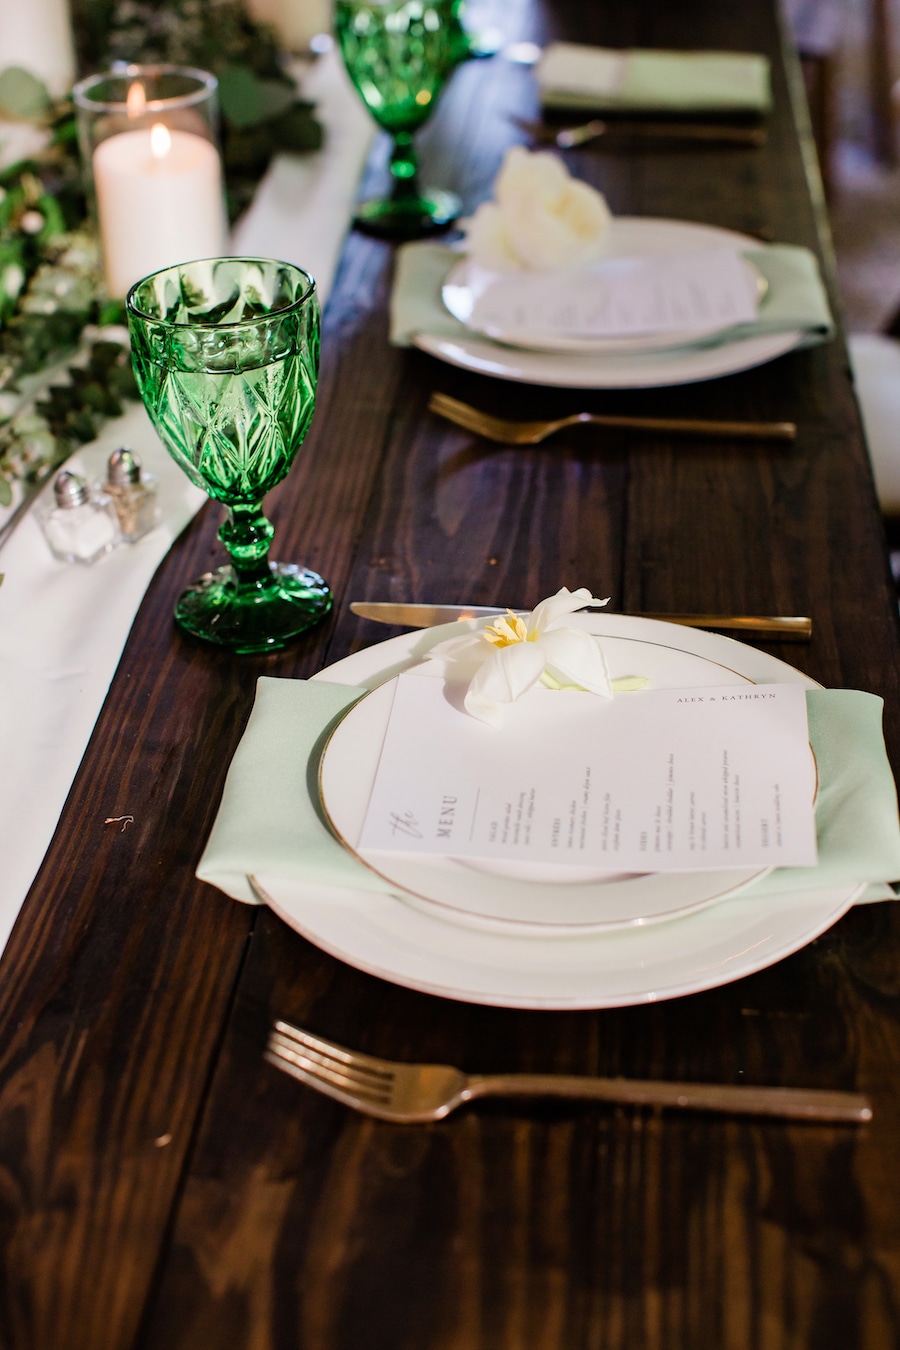 Farm table with white runner, greenery and candles in neutral wedding colors at Nashville wedding venue CJ’s Off the Square.